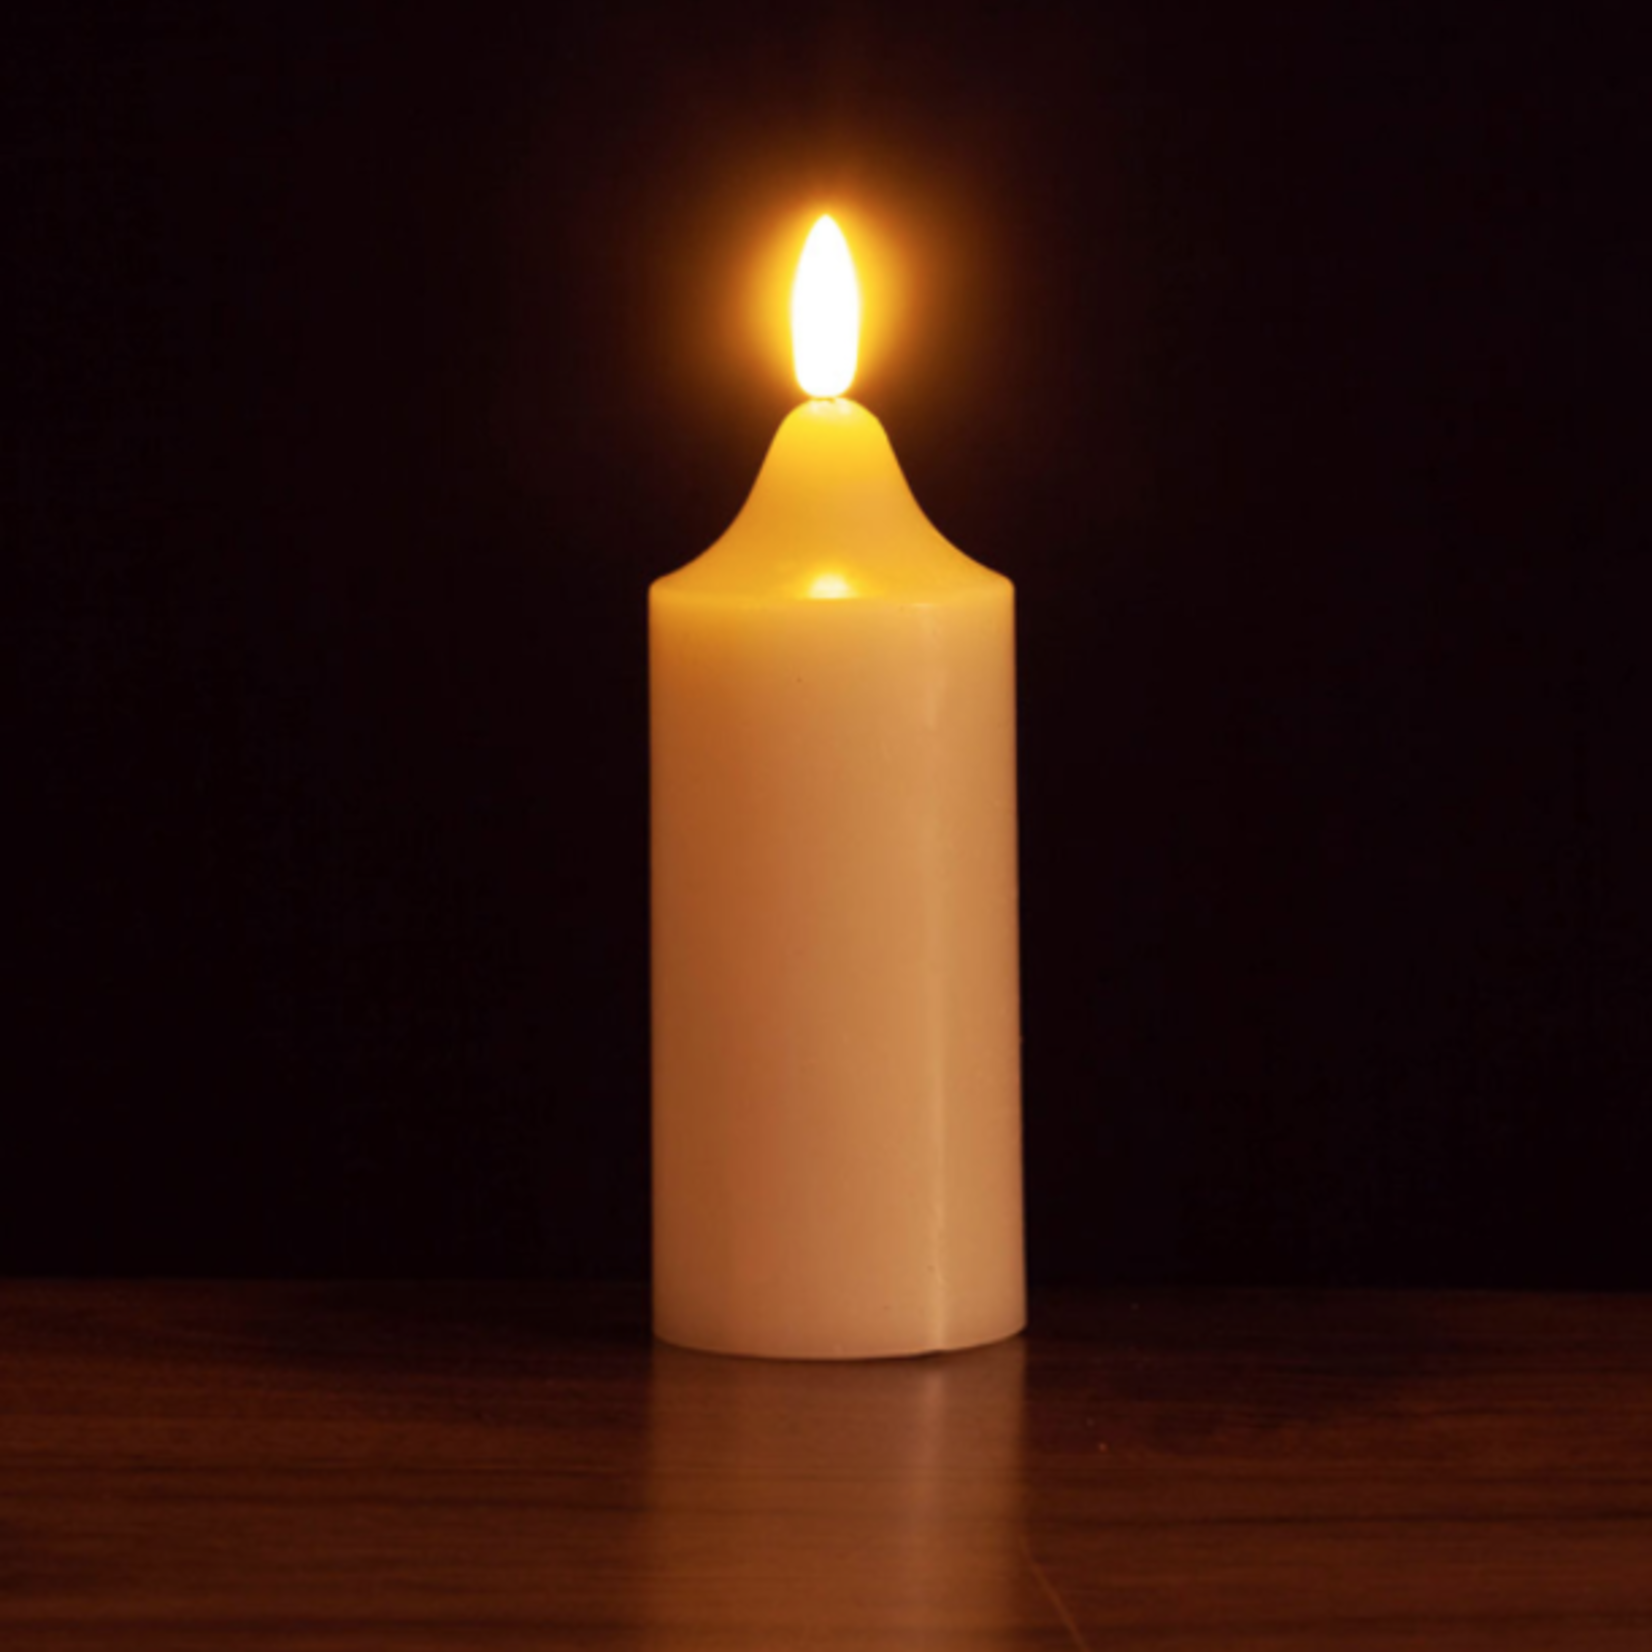 6”H X 2”D LED WAX FLICKERING IVORY CANDLE